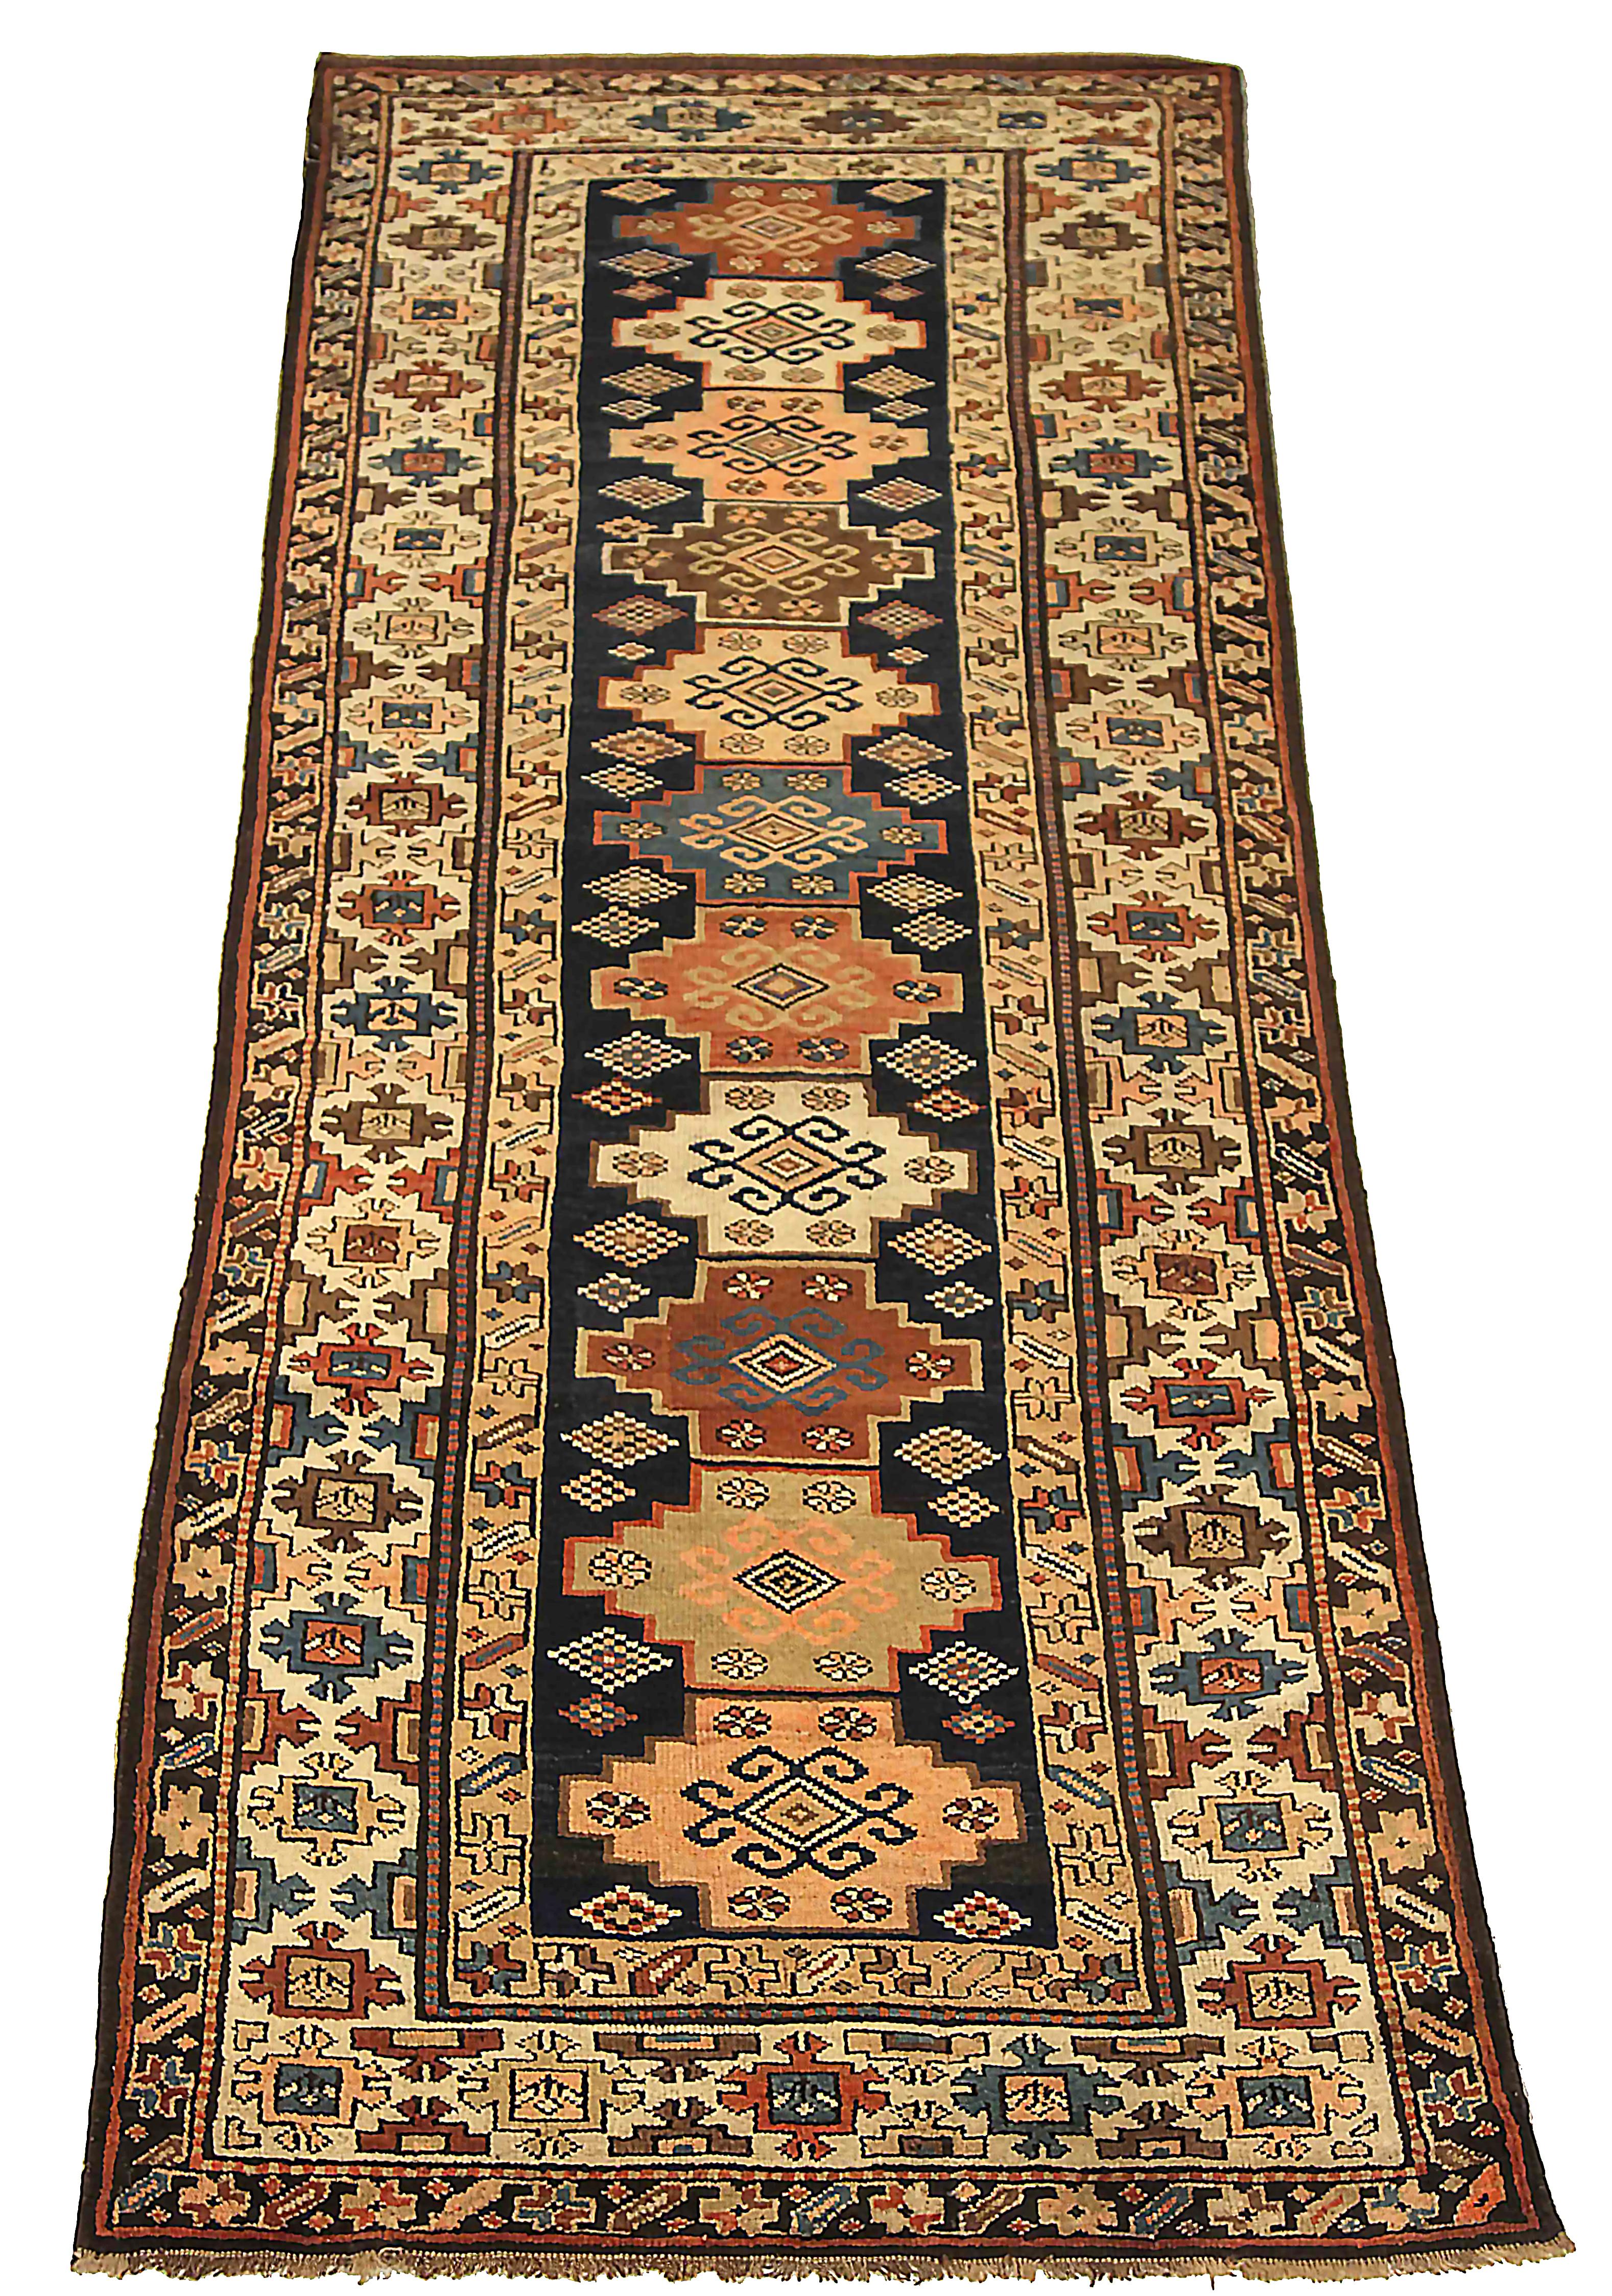 Antique Russian runner rug handwoven from the finest sheep’s wool. It’s colored with all-natural vegetable dyes that are safe for humans and pets. It’s a traditional Kazak design handwoven by expert artisans. It’s a lovely runner rug that can be